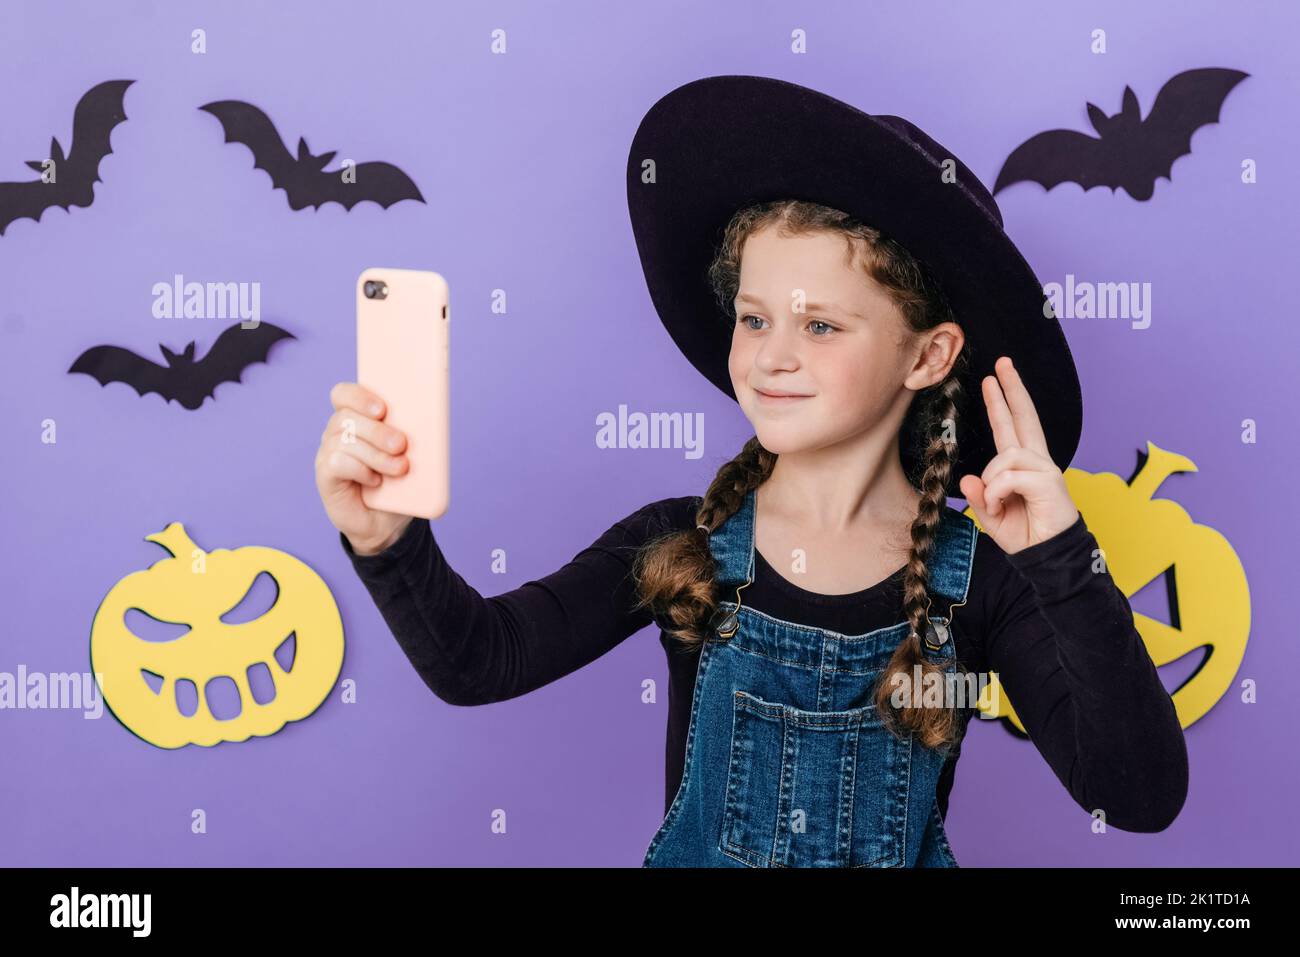 Smiling little girl kid in big hat holding telephone shooting making funky selfies showing v-sign symbol, isolated on purple color background in studi Stock Photo